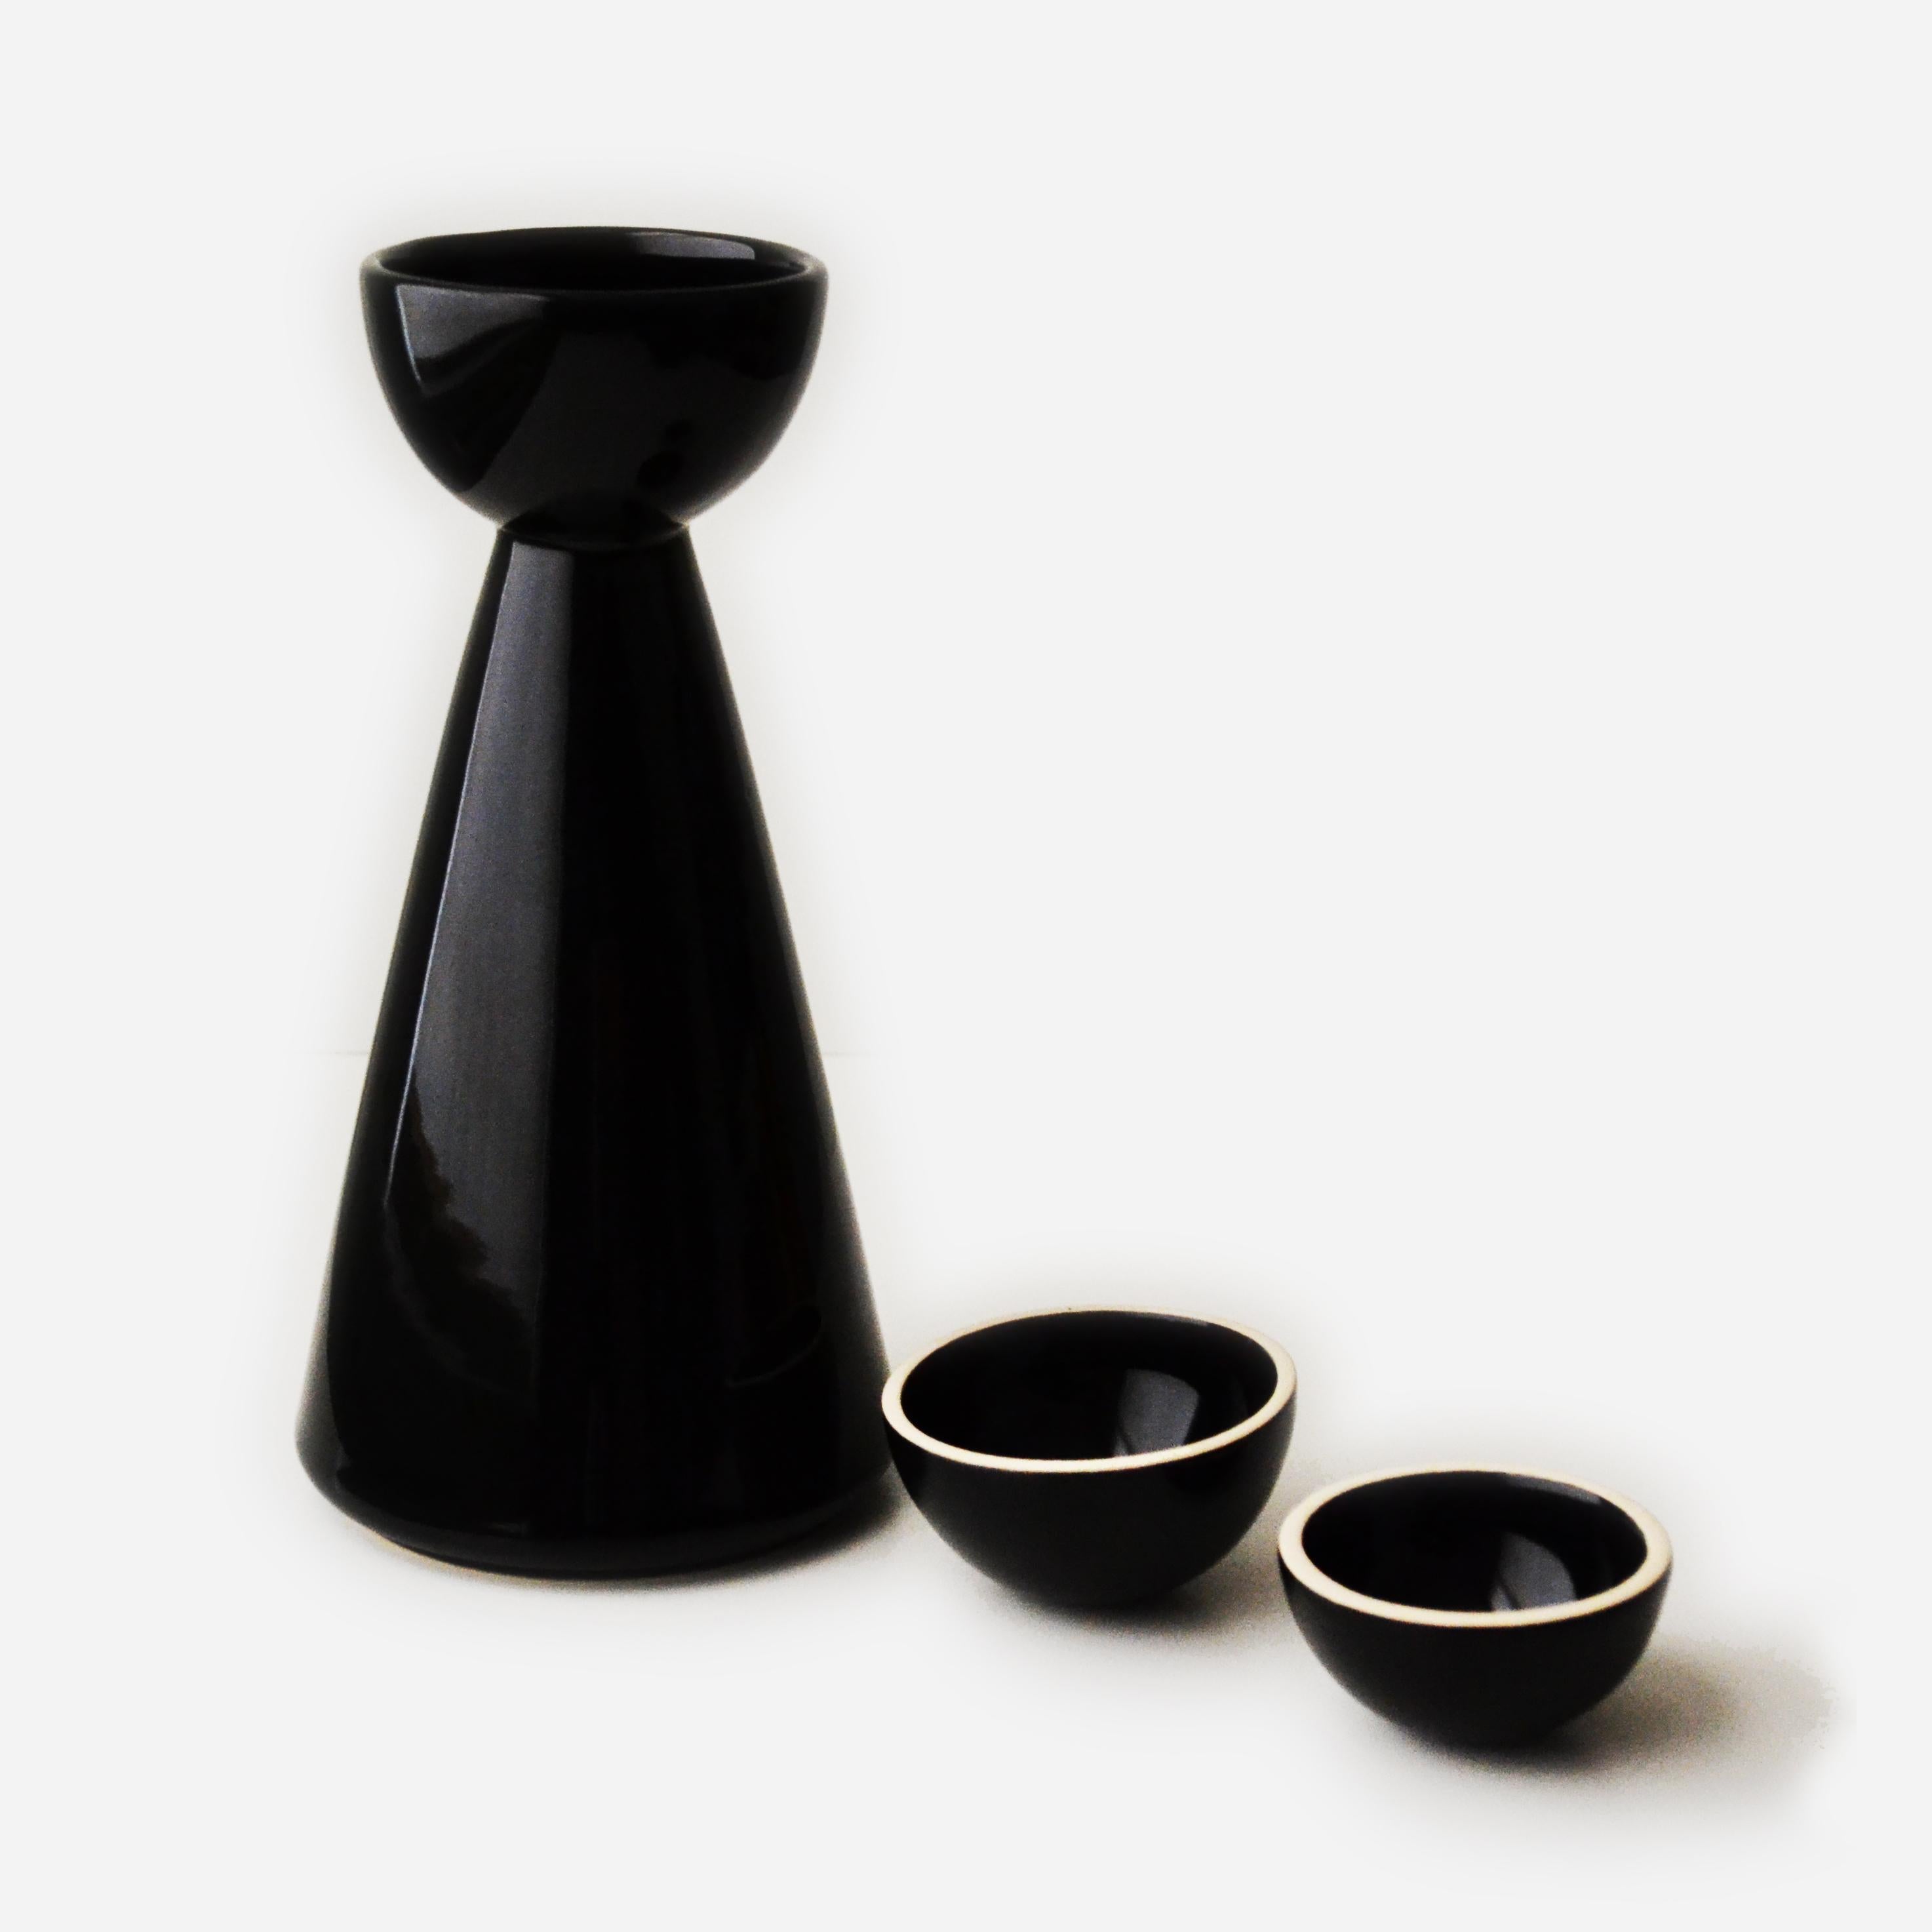 HALF MOON
The Half Moon carafe is specially designed to contain Mezcal, Tequila or any other liquor. Its conical shape refers to the shape of the agave leaves while the upper part takes the semi-spherical shape of the cup traditionally used to